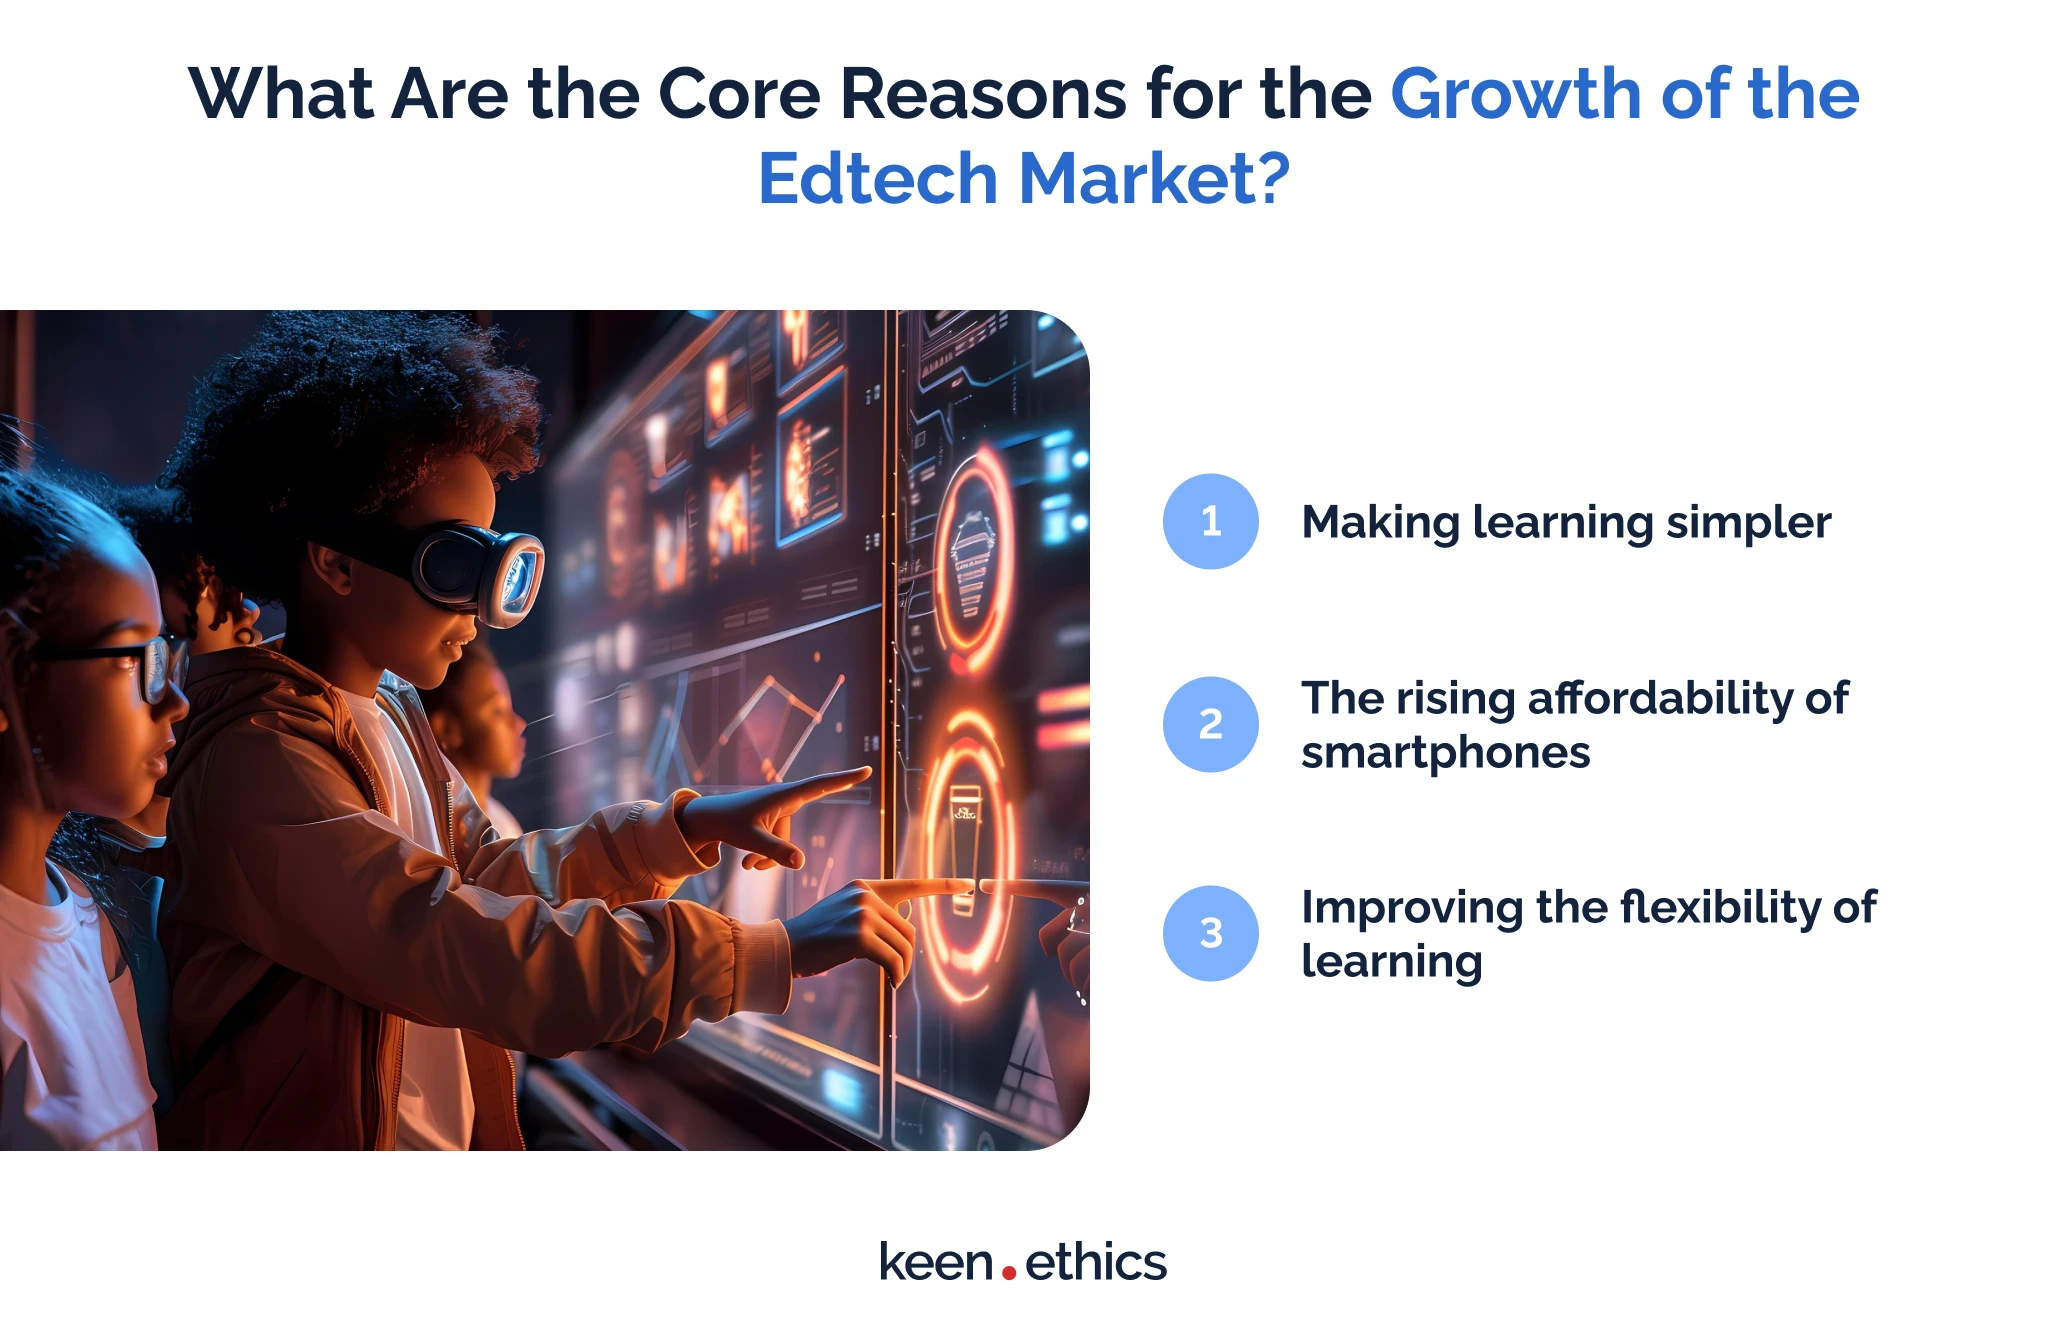 What are the core reasons for the growth of the edtech market?